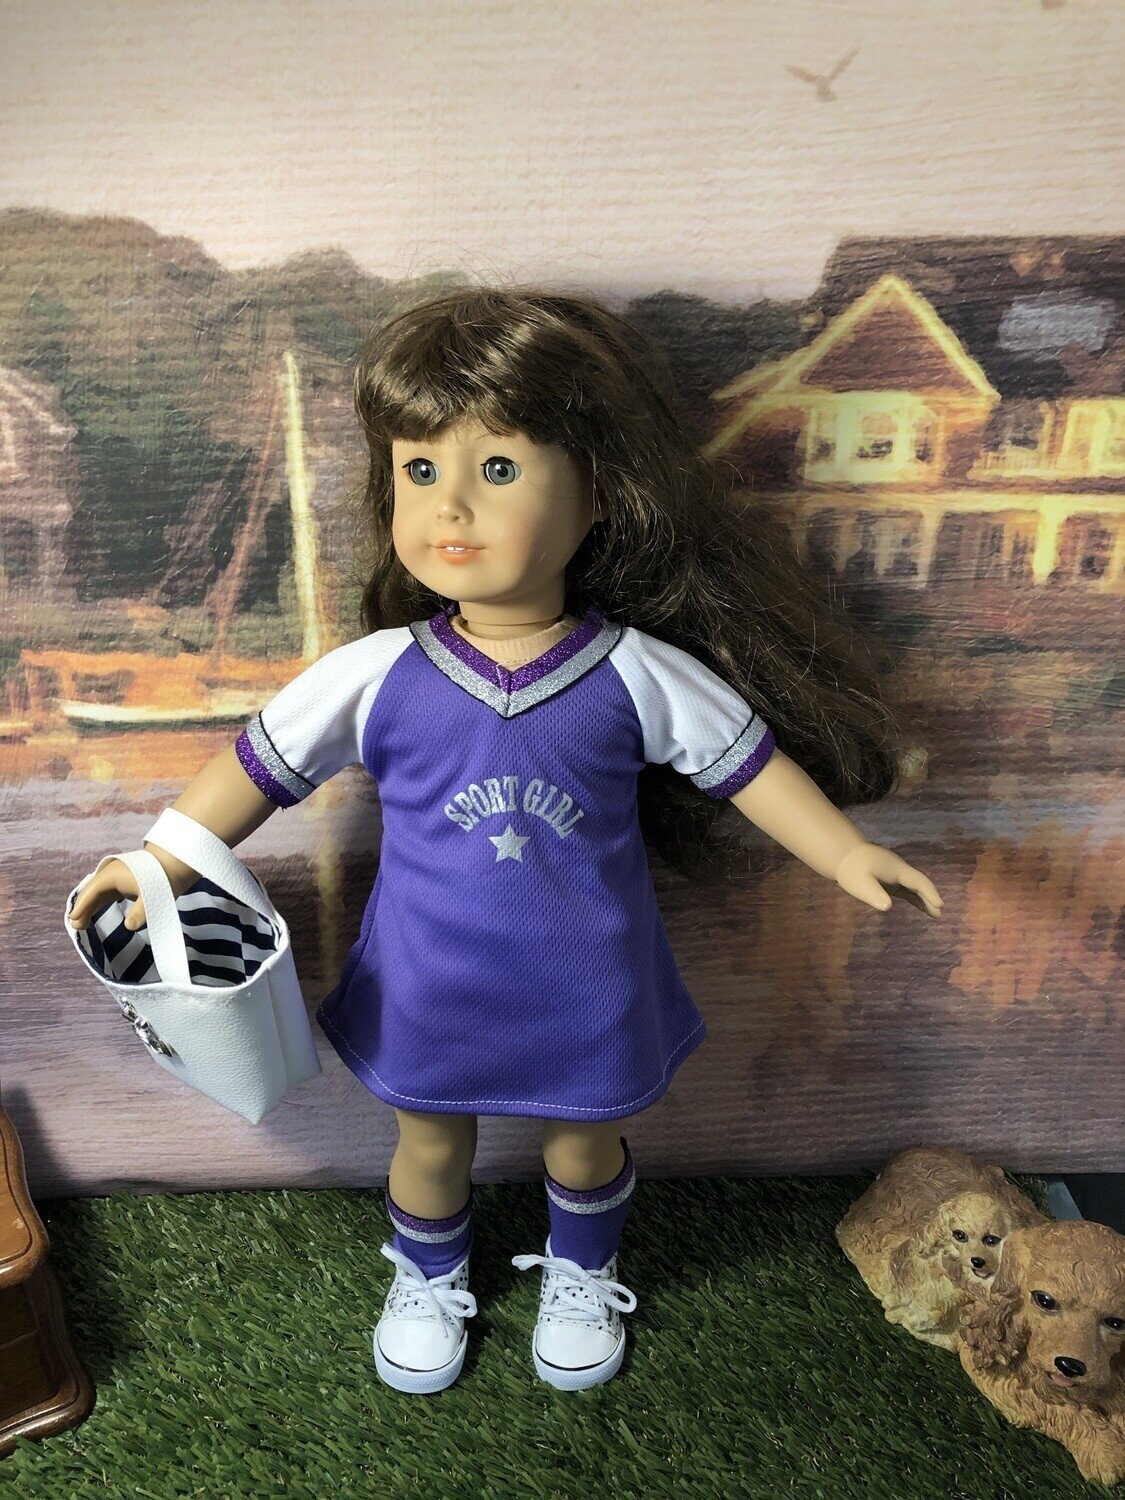 Tennis outfit for 18" doll